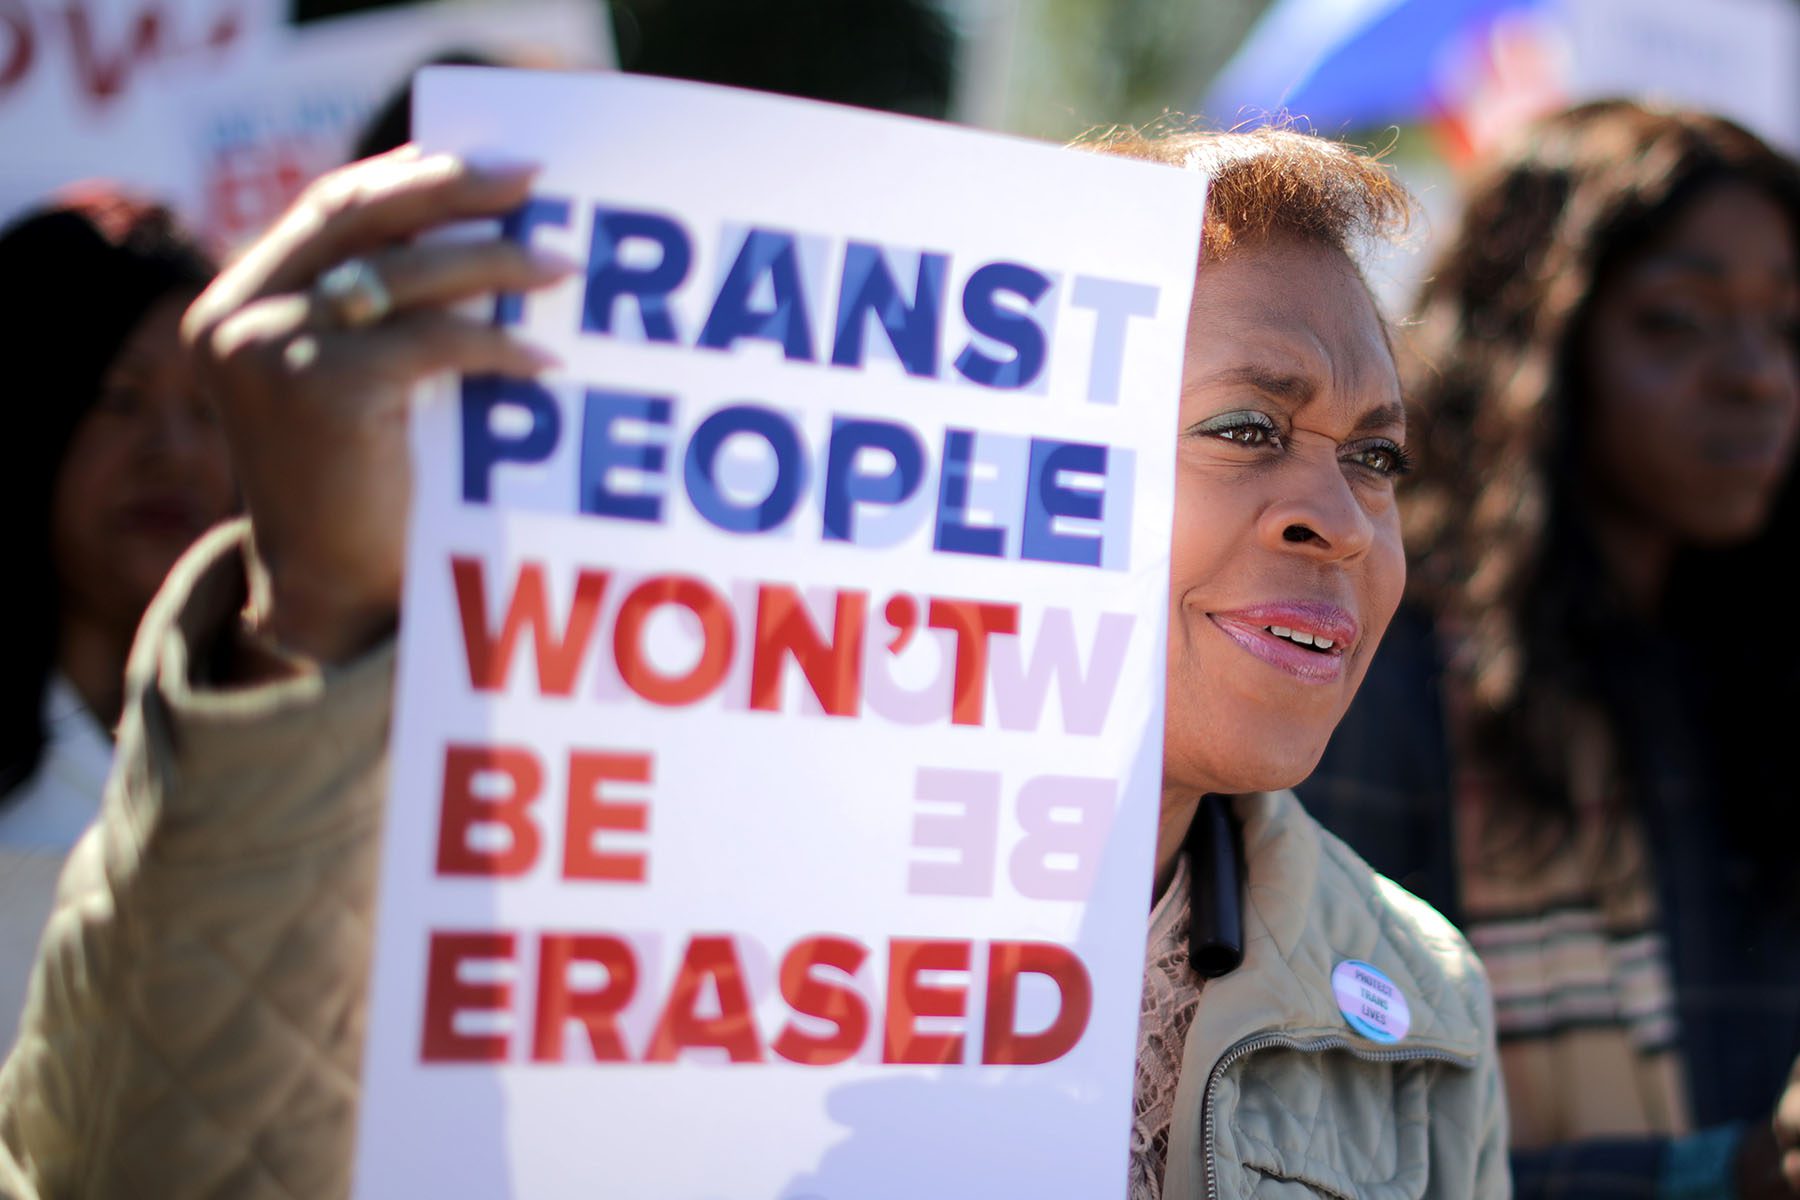 An activist holds a sign that reads "Trans People Won't Be Erased."